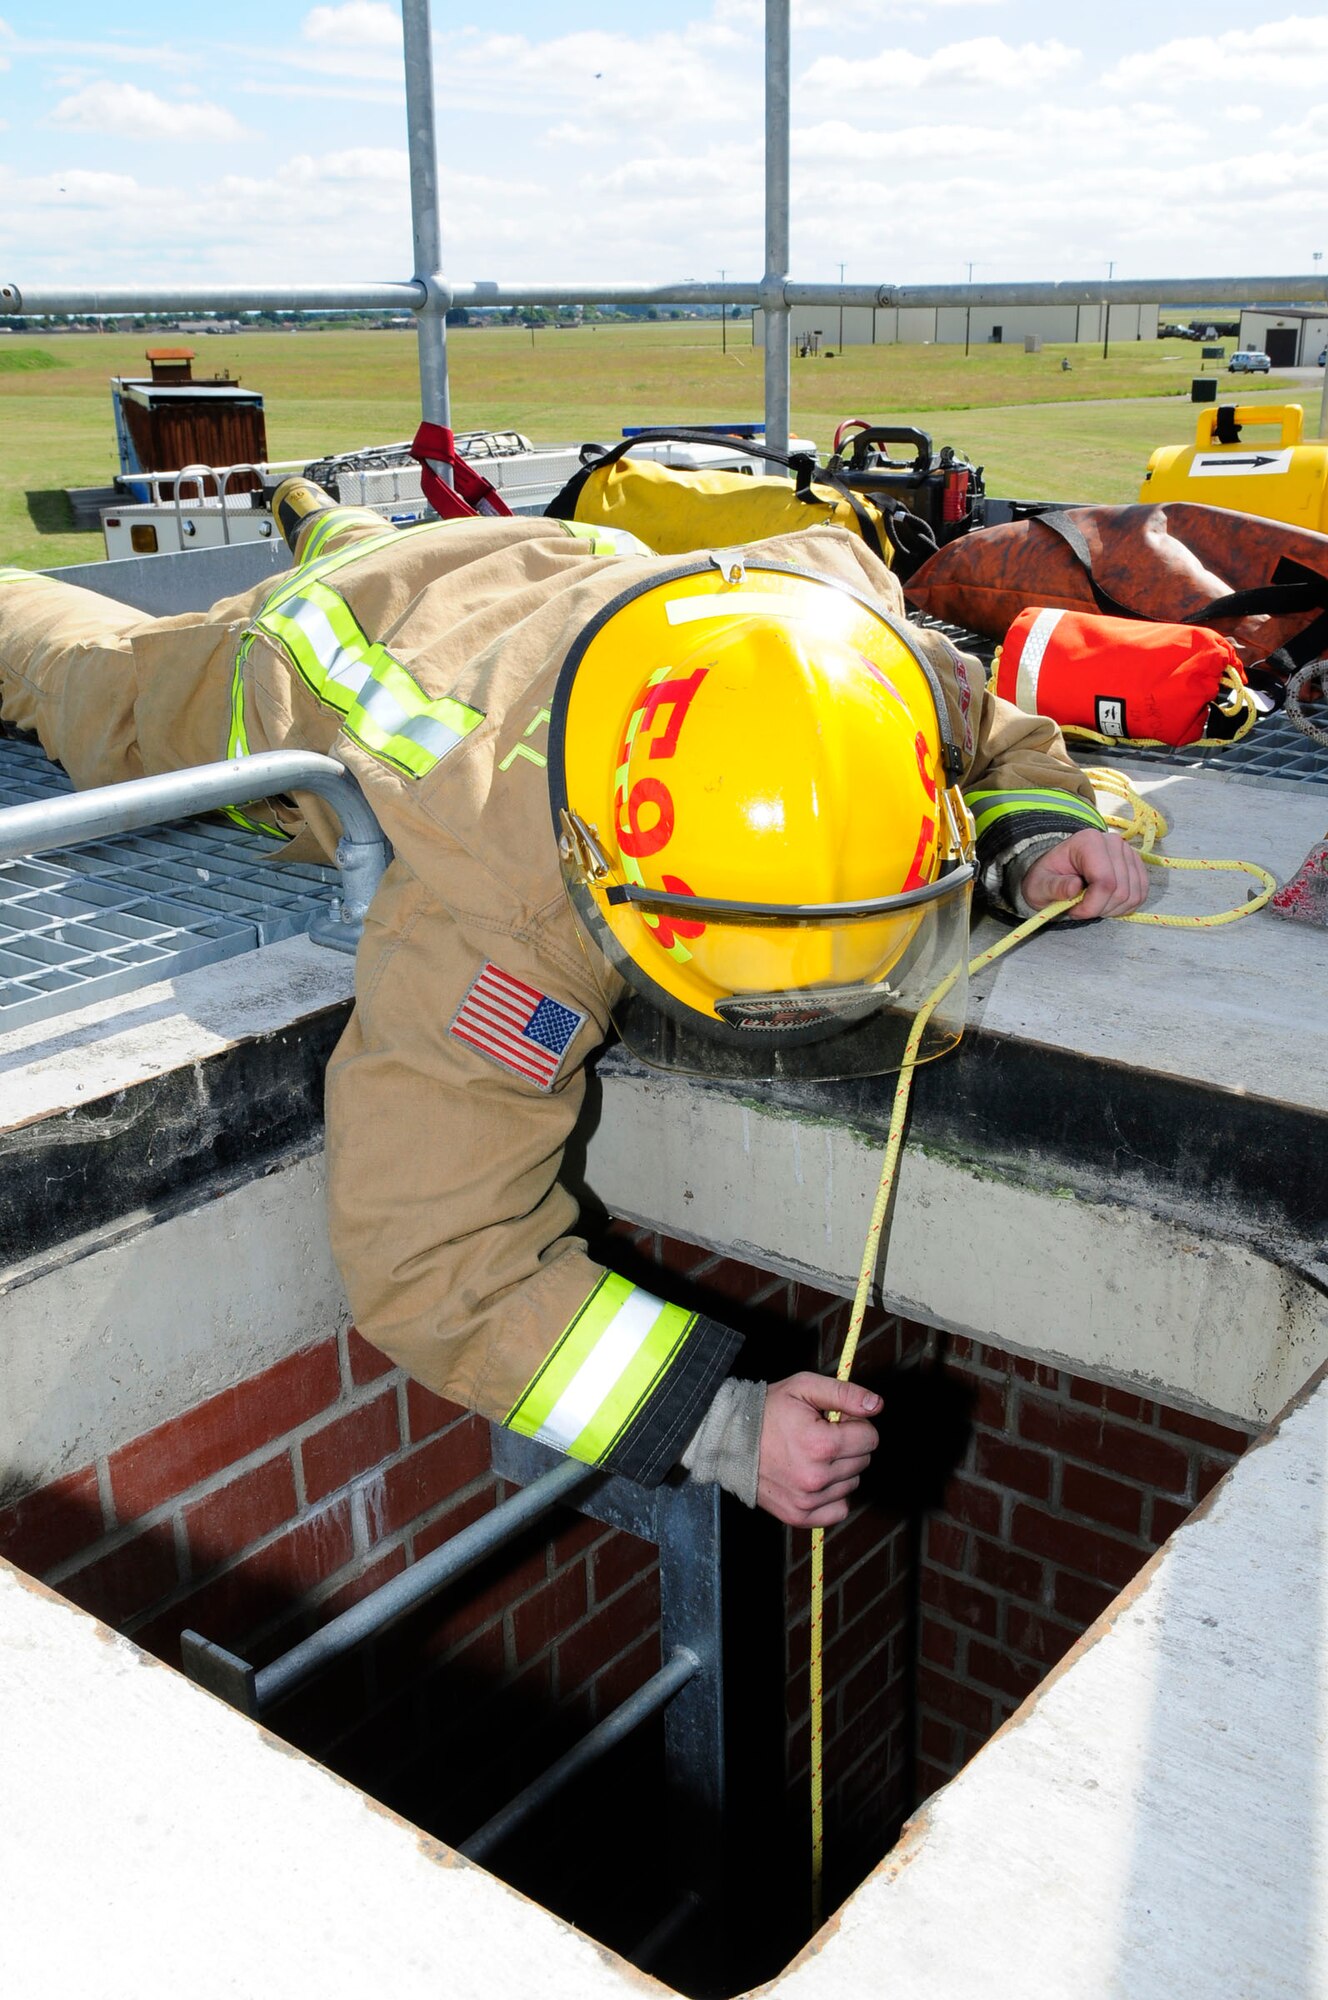 U.S. Air Force Airman Cody Eastridge, 100th CES Fire Department firefighter from Sacremento, Calif., lowers a monitoring device into a confined space to determine whether or not an atmospheric hazard exists June 26, 2014, on RAF Mildenhall, England. The training was part of a U.S. Air Forces in Europe inspection. (U.S. Air Force photo/Karen Abeyasekere/Released)